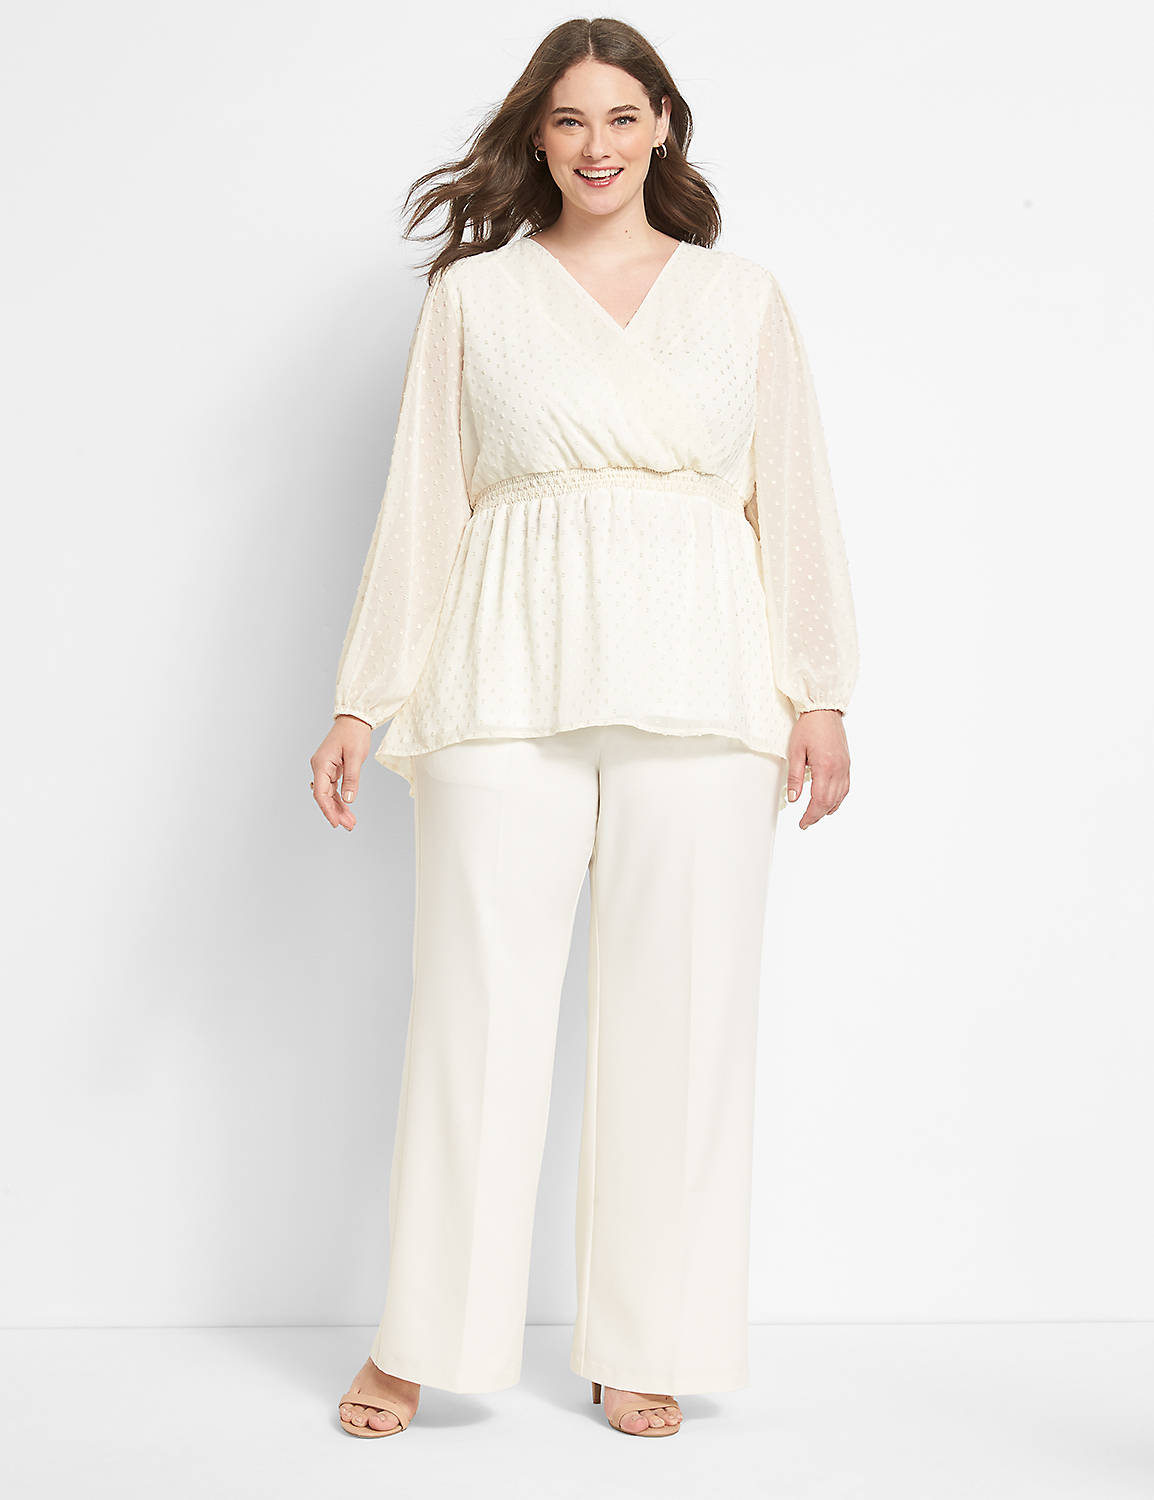 Lane Bryant formal Pant Suits for weddings